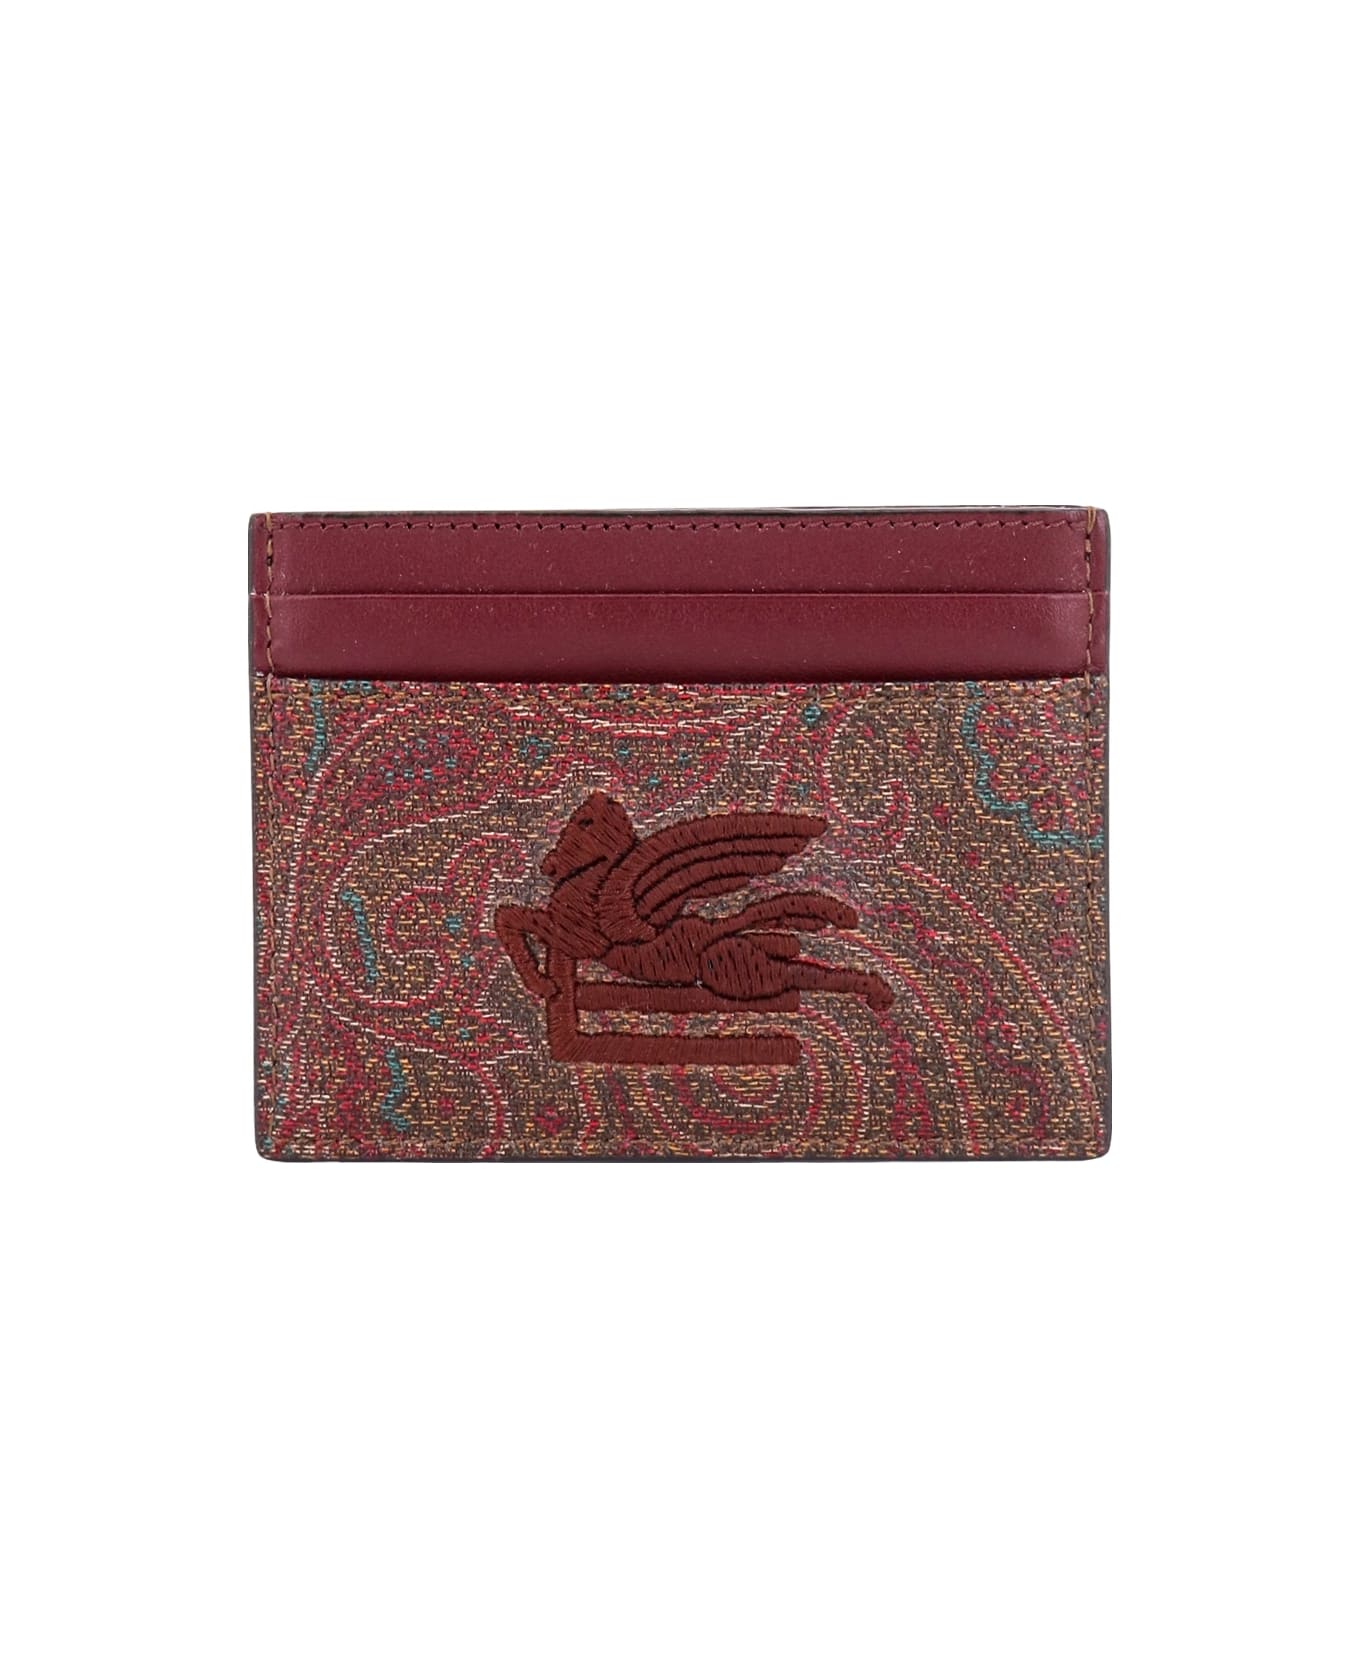 Etro Paisley Card Holder - Brown